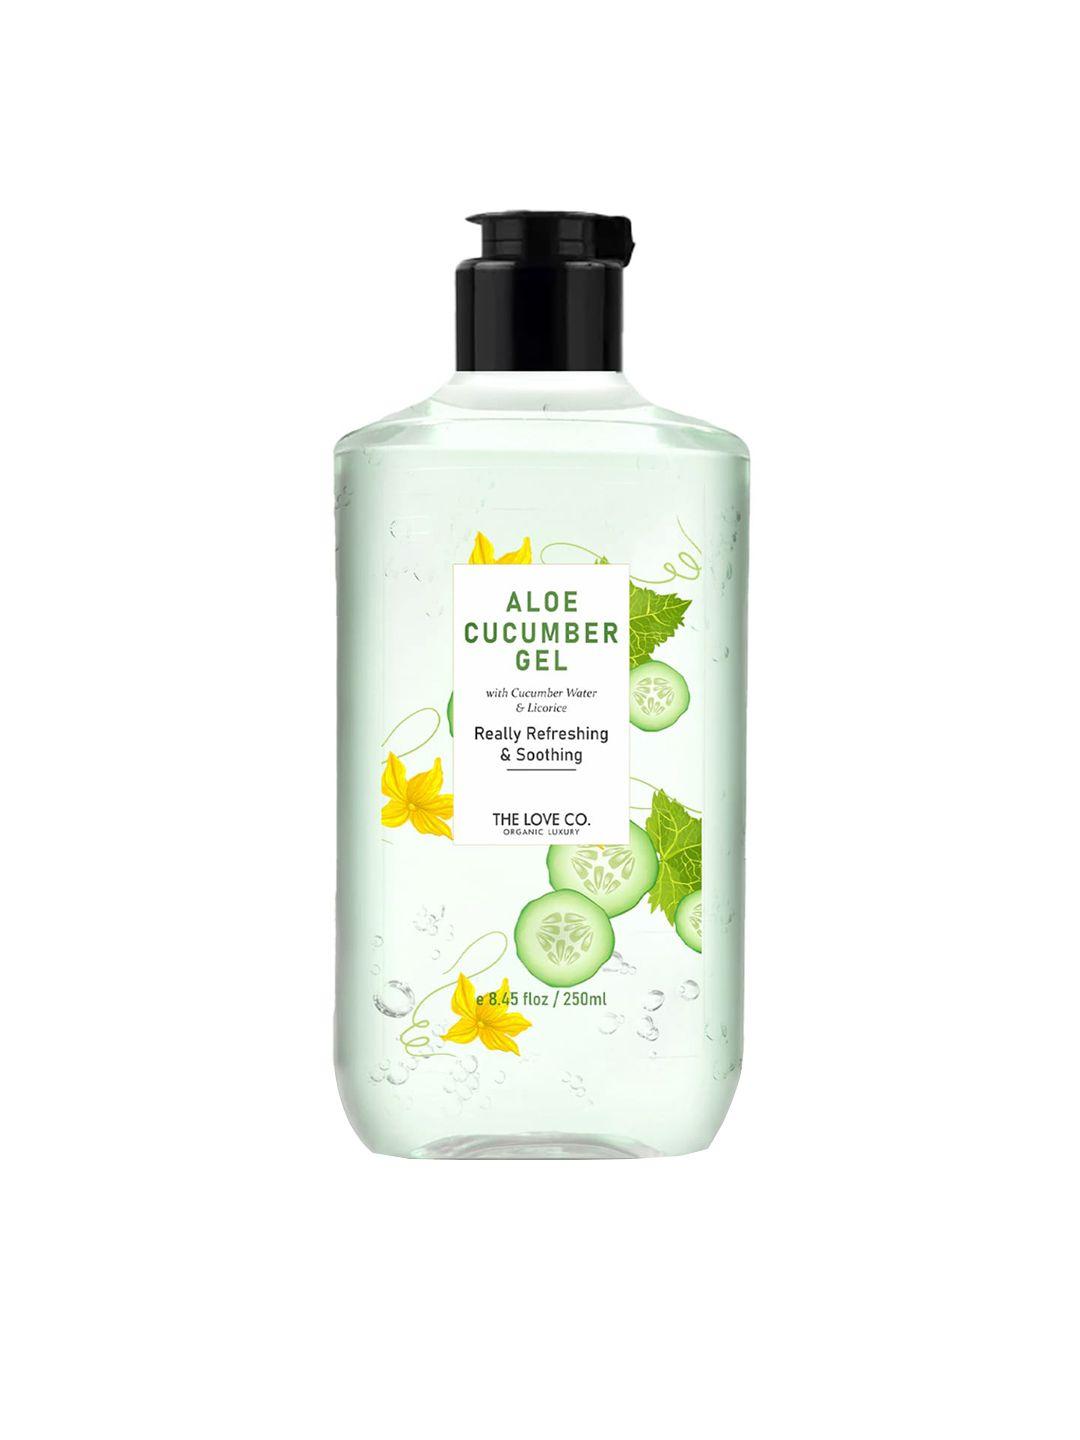 the love co. unisex aloe with cucumber water & licorice gel 250ml